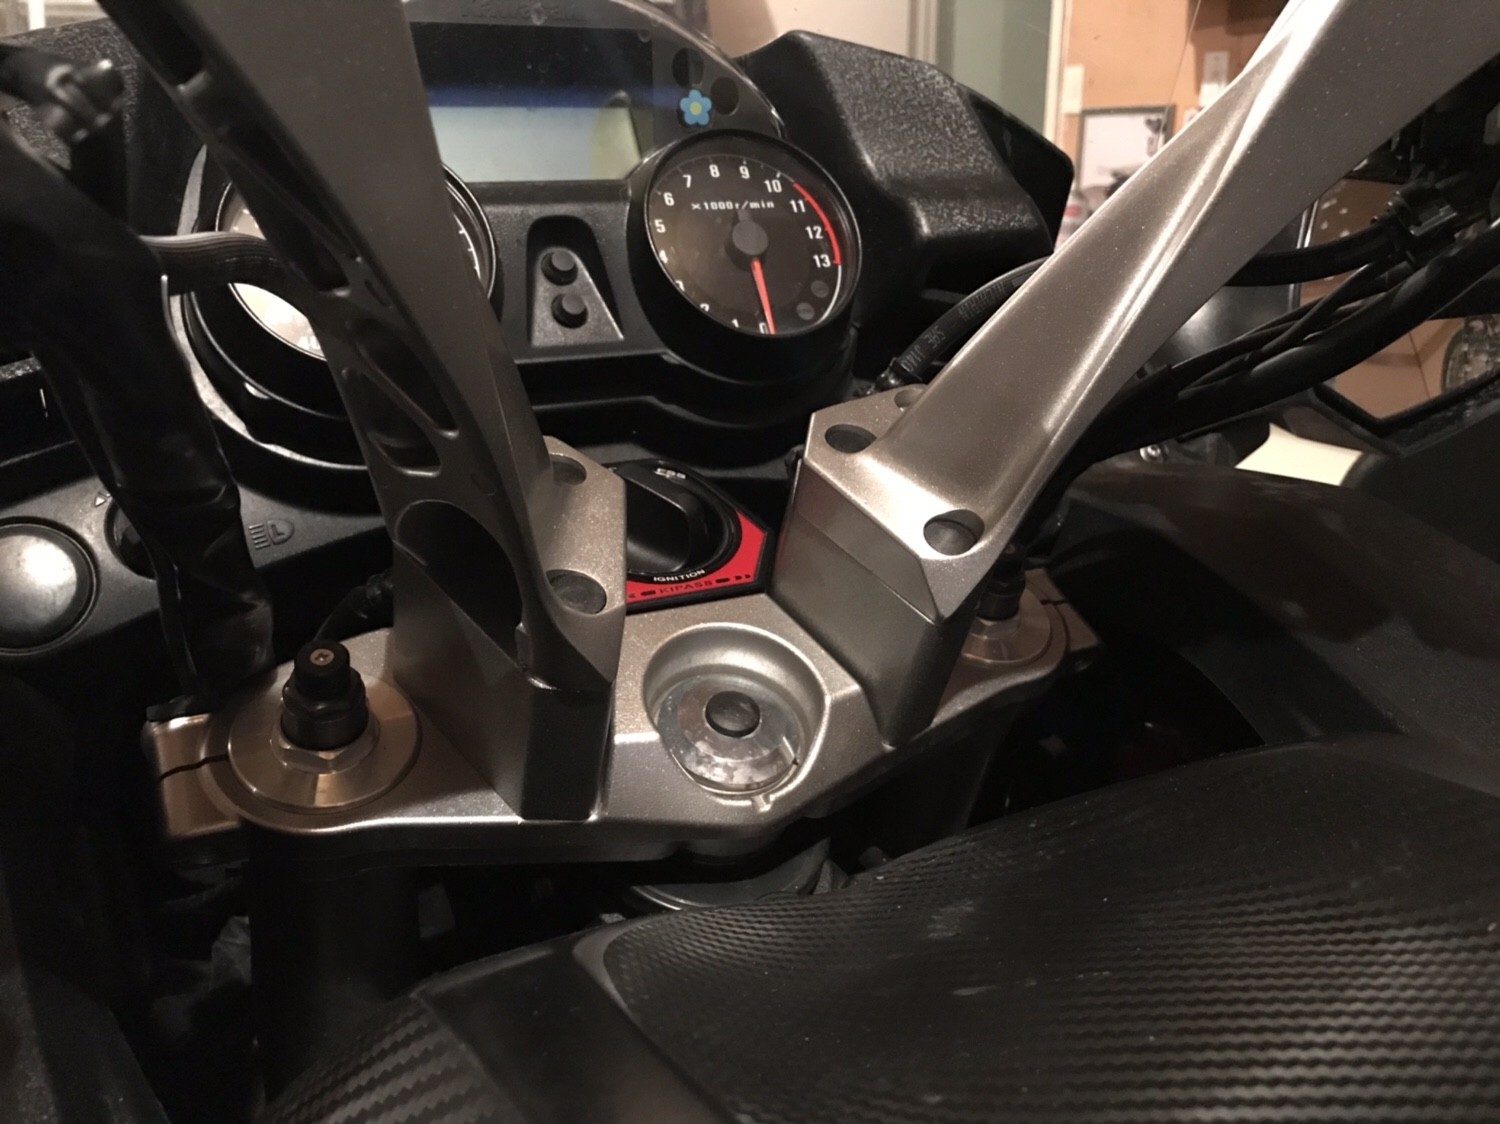 2 inch handlebar risers added to the Concours